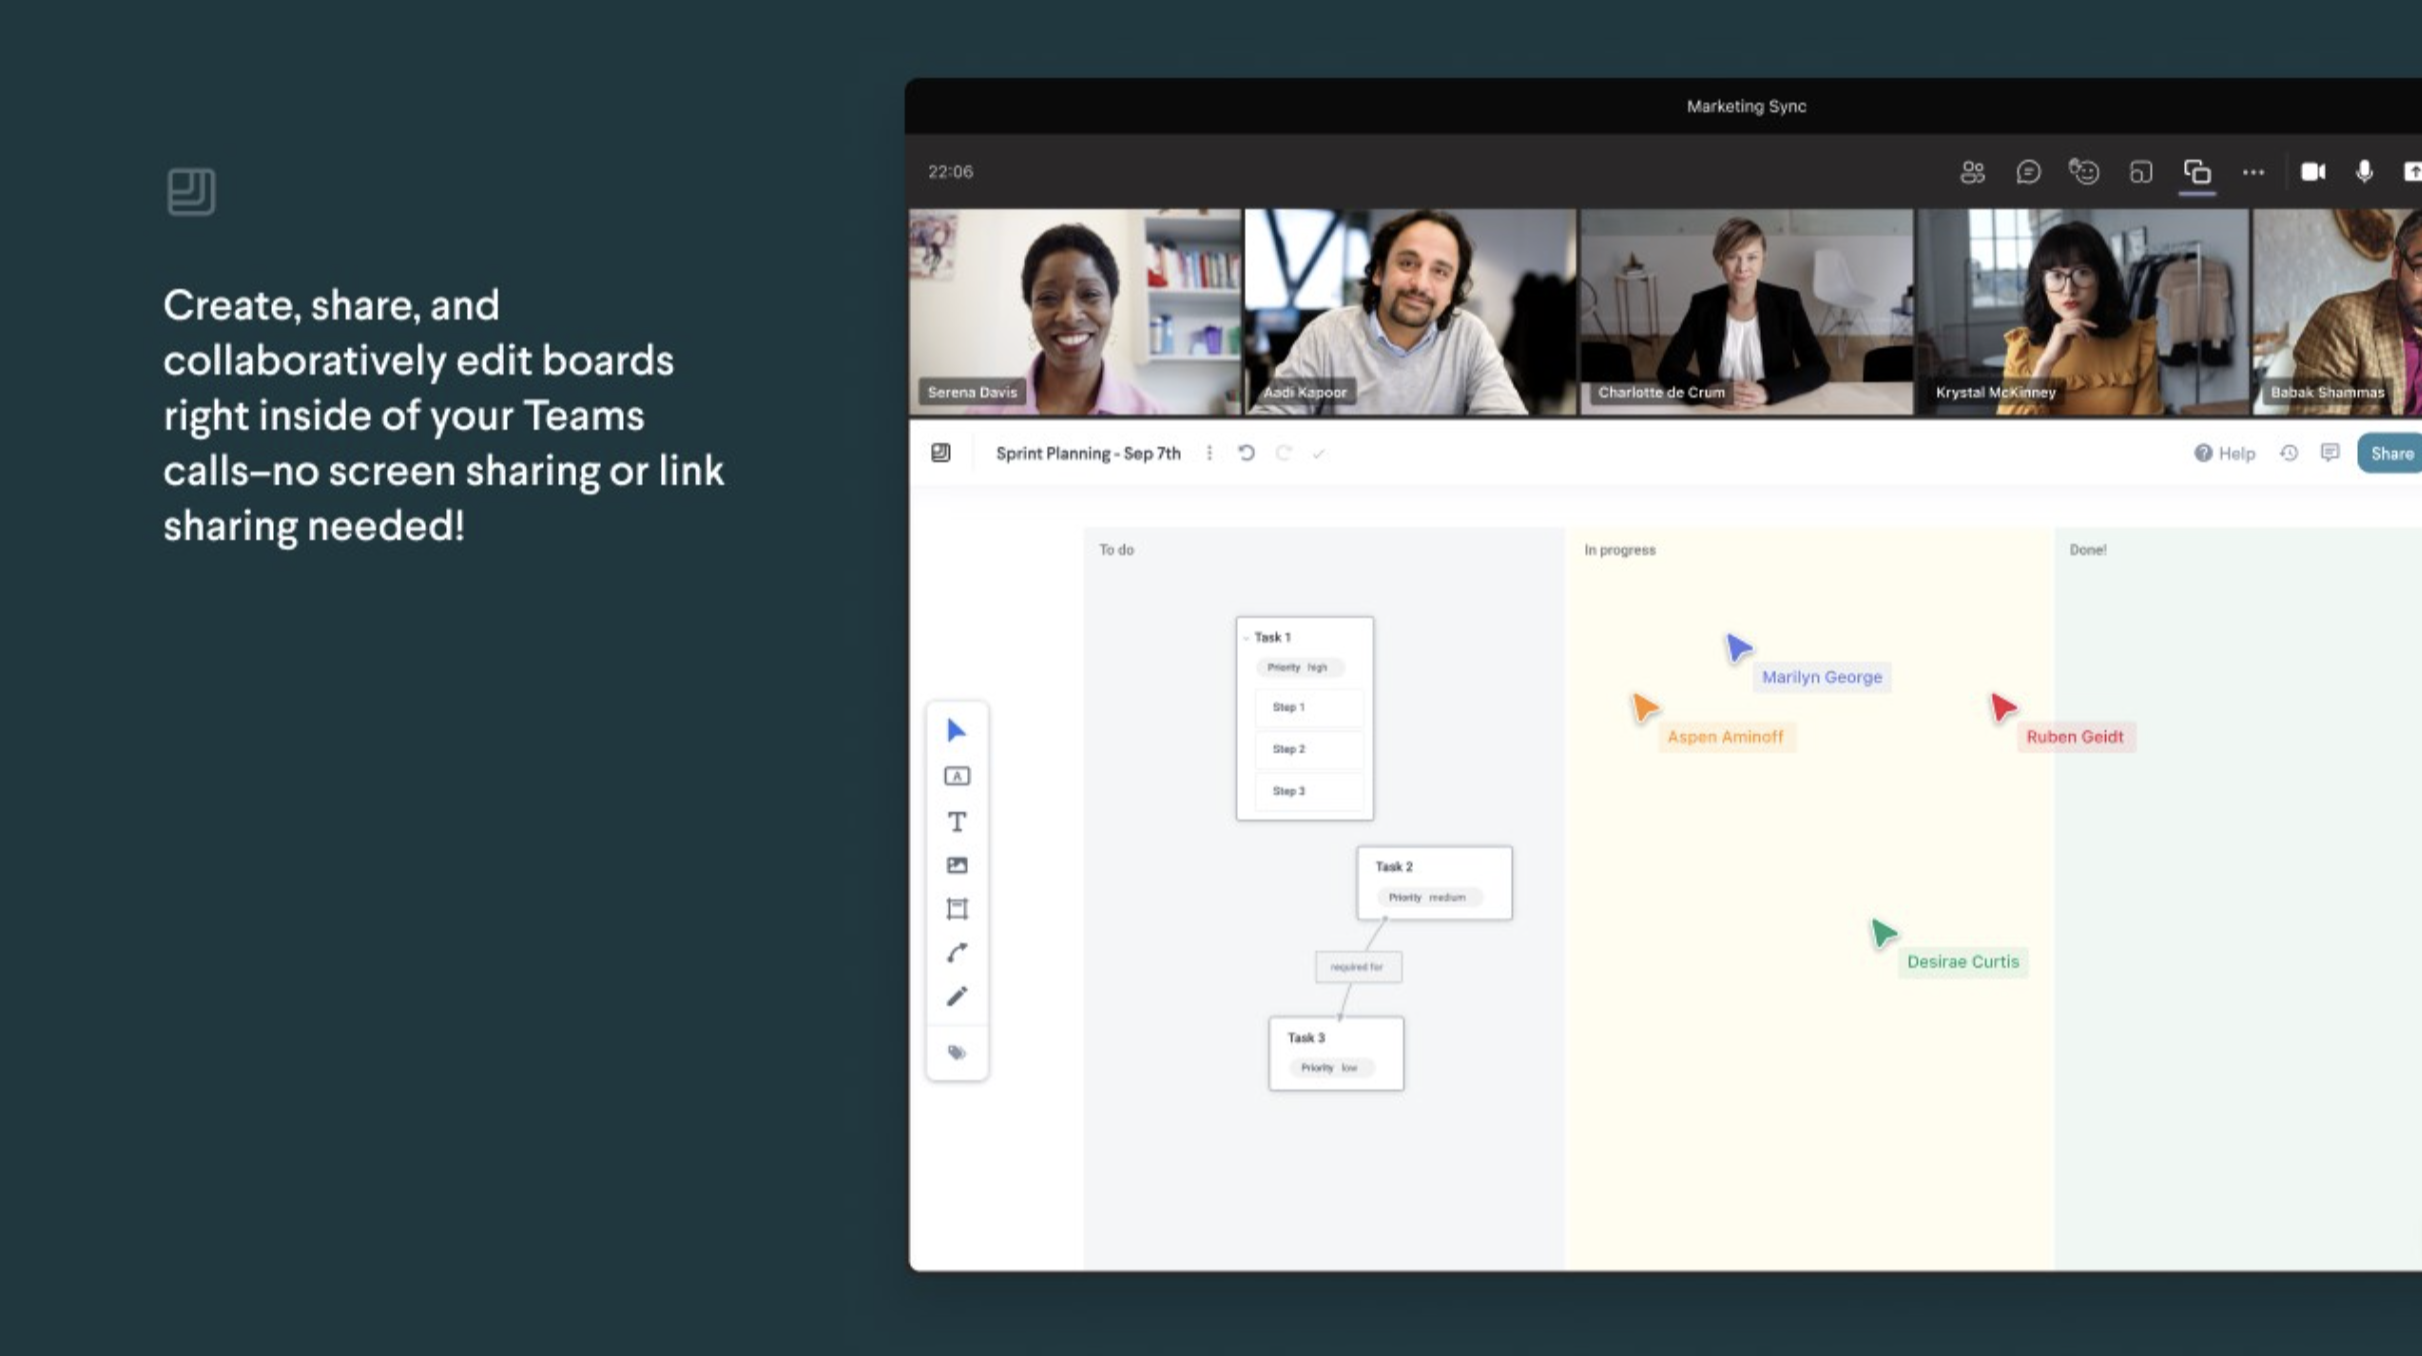 Create, share and edit boards inside and out of Teams calls.